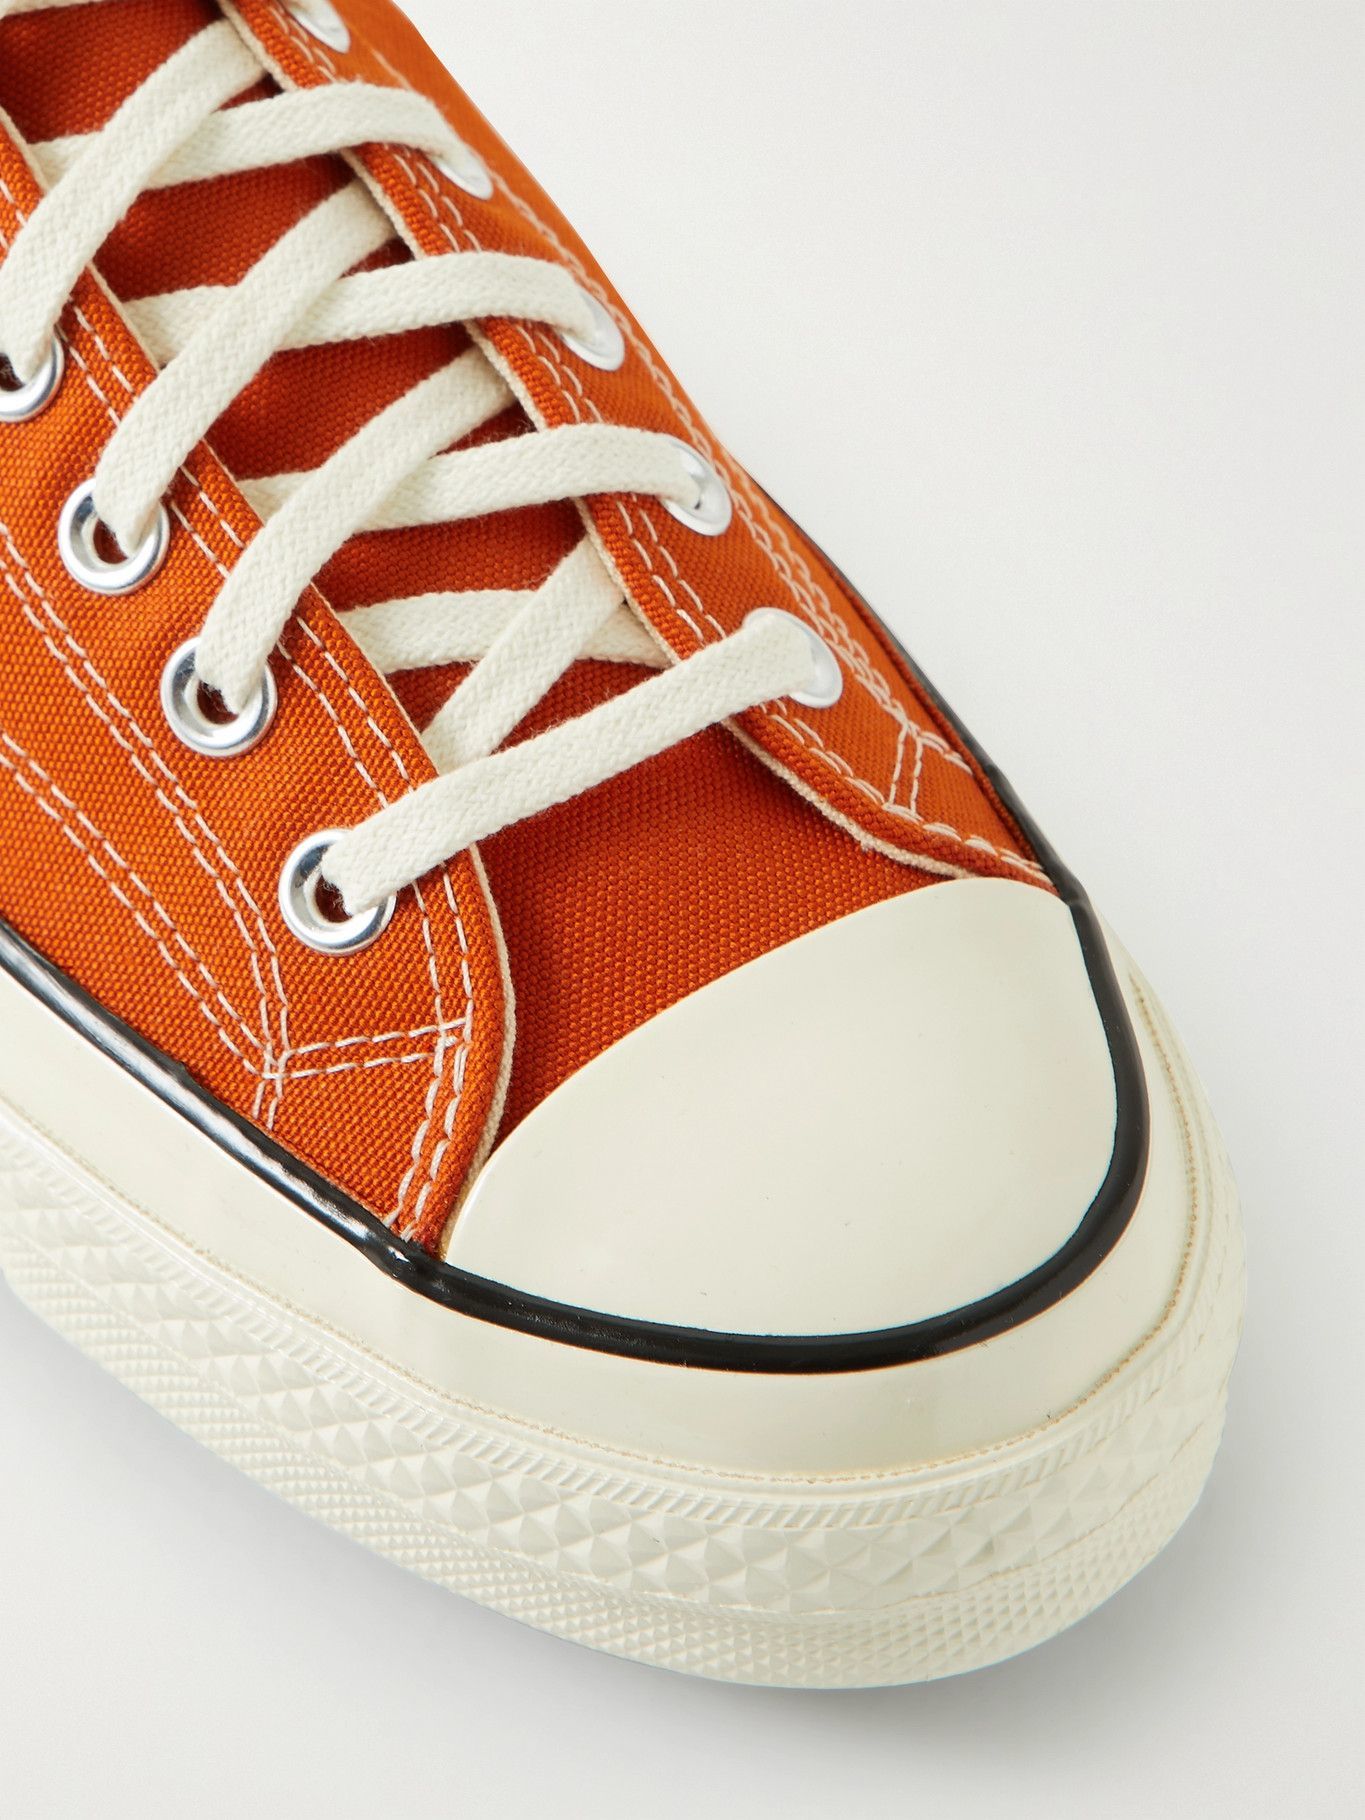 Converse - Chuck 70 OX Recycled Canvas Sneakers - Orange Converse